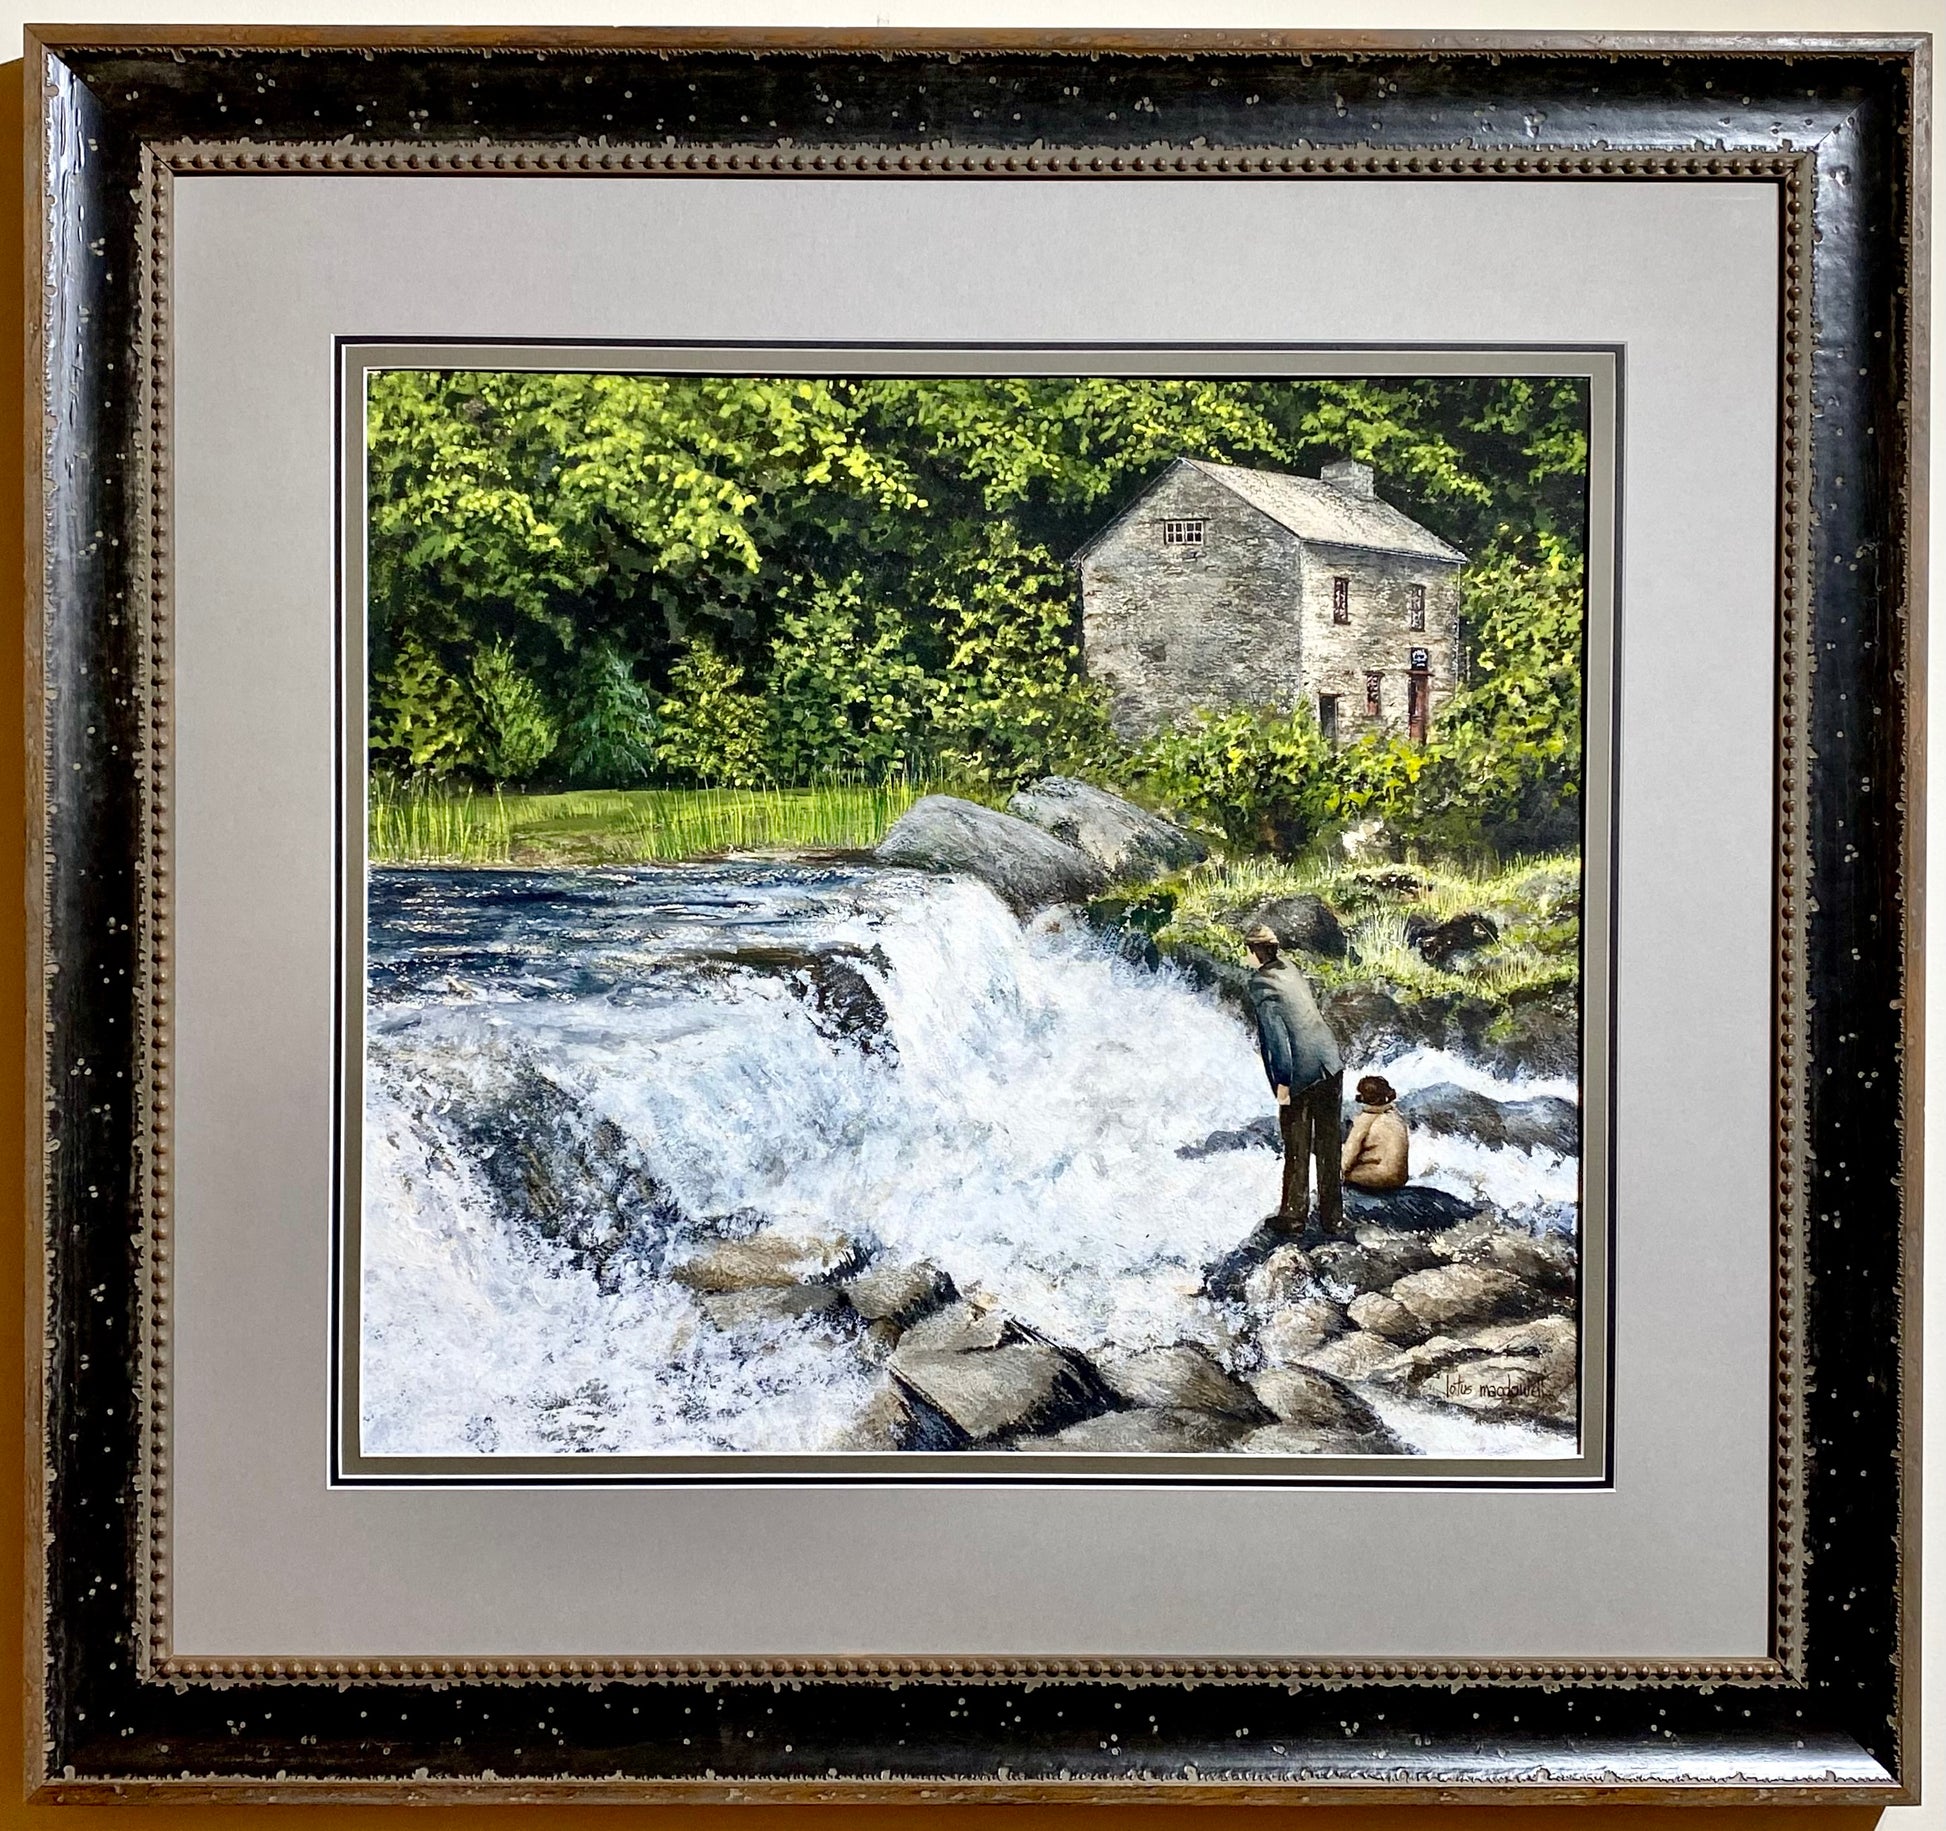 Waters Edge- Belfast, Northern Ireland - Original Watercolor Painting by Lotus MacDowell, Artworks WV.  Sometimes a scene in a painting can evoke feelings of awe, contentment and enjoyment all at the same time. This painting, titled "Northern Ireland", is by Lotus MacDowell and depicts a beautiful waterfall surrounded by rocks and deep green foliage. 